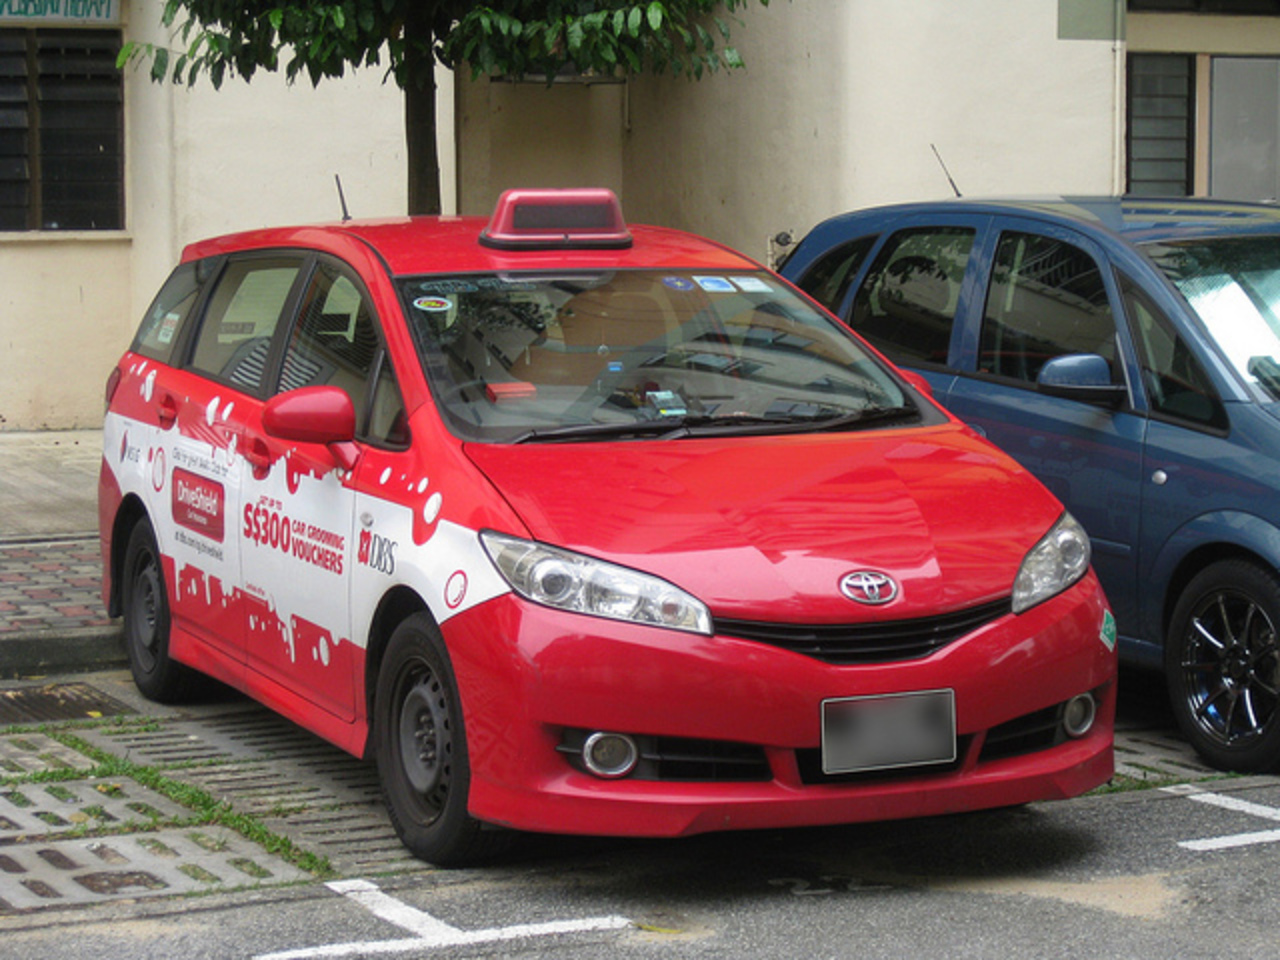 Trans Cab Toyota Wish Taxi | Flickr - Photo Sharing!